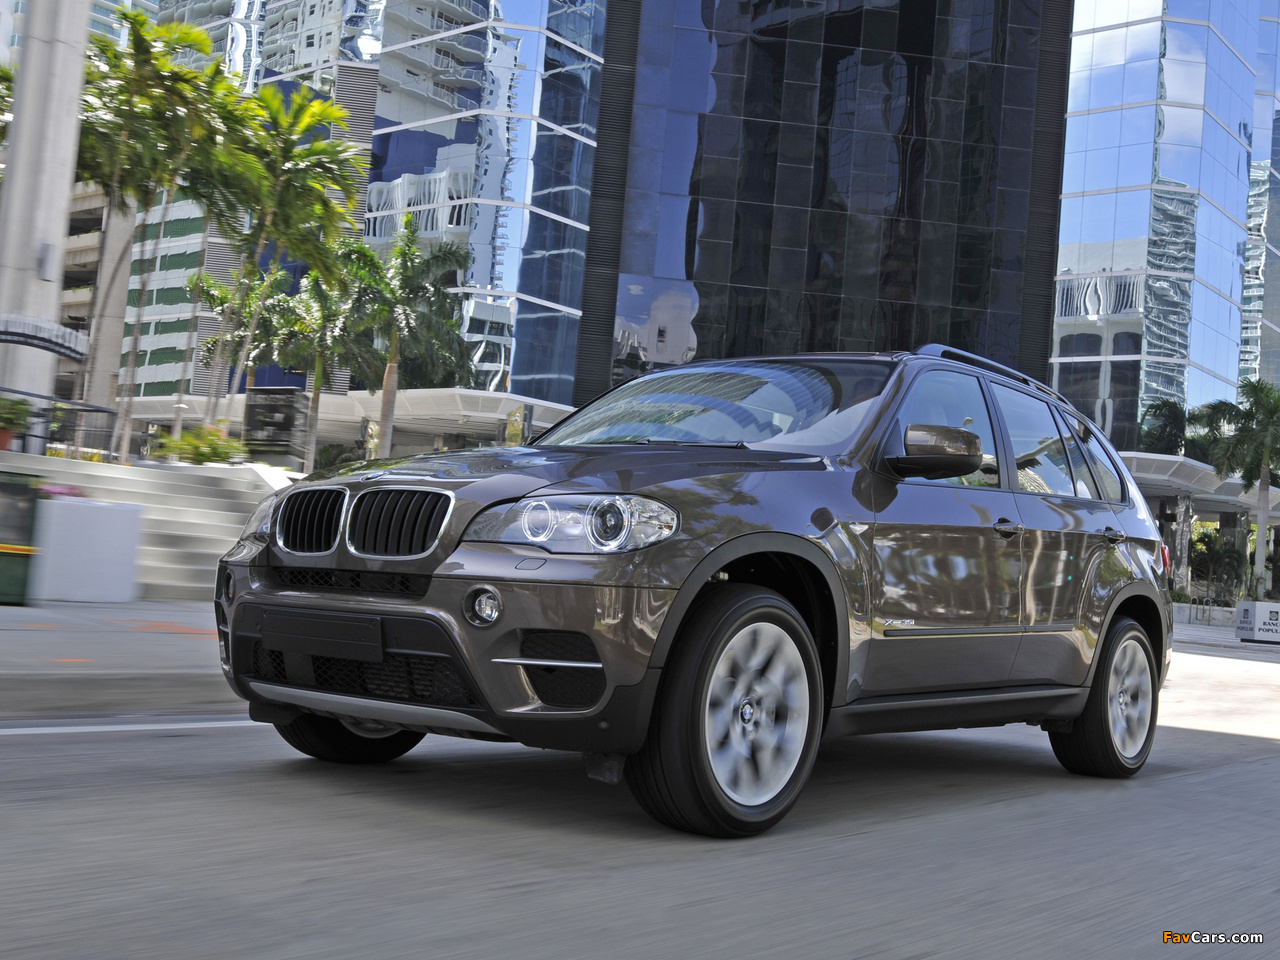 BMW X5 xDrive35i (E70) 2010 pictures (1280 x 960)